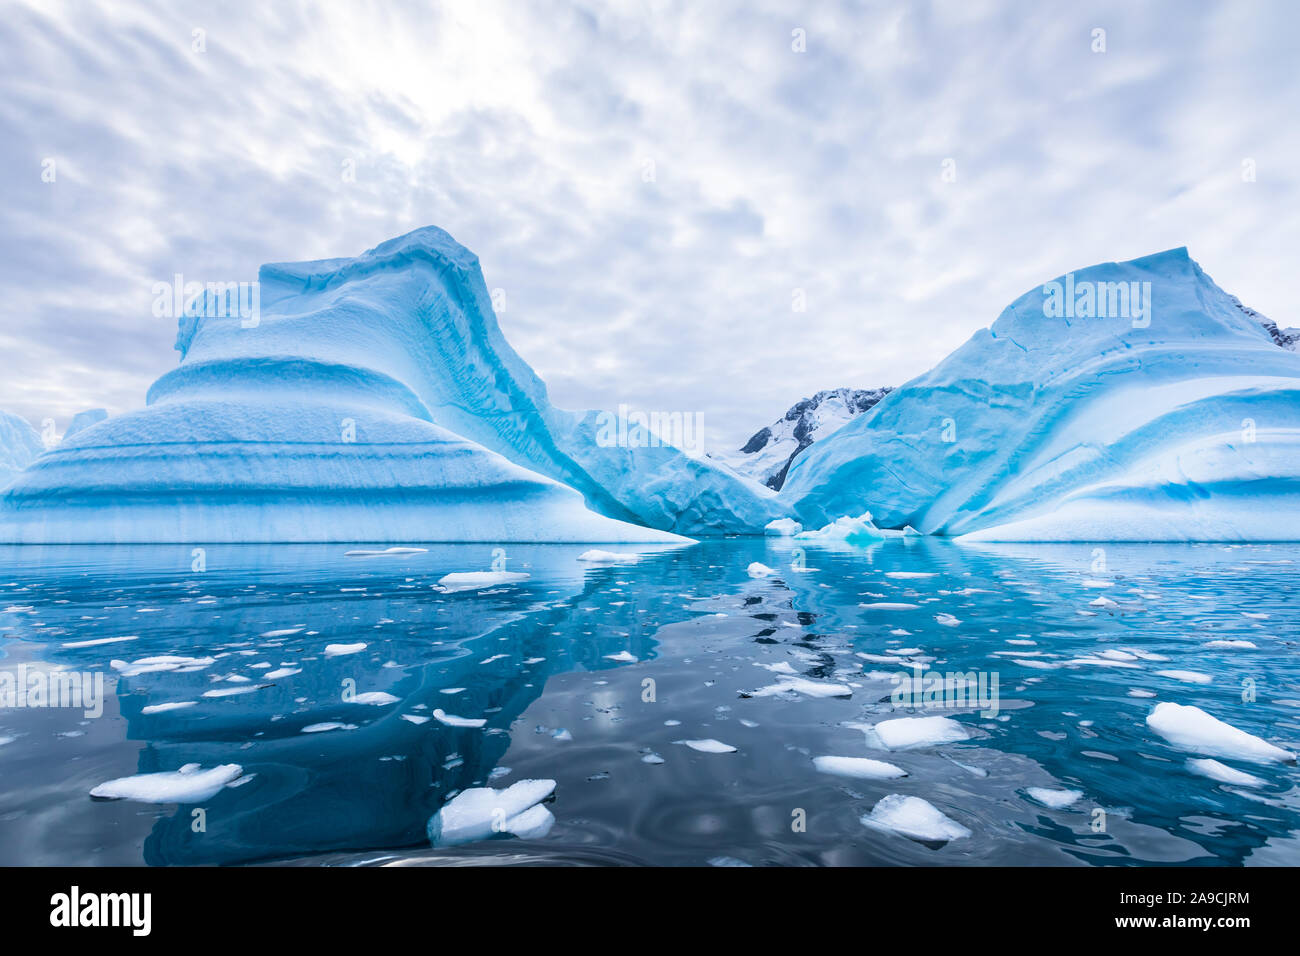 Iceberg in Antarctica floating in the sea, frozen landscape with massive pieces of ice reflecting on water surface, Antarctic Peninsula Stock Photo